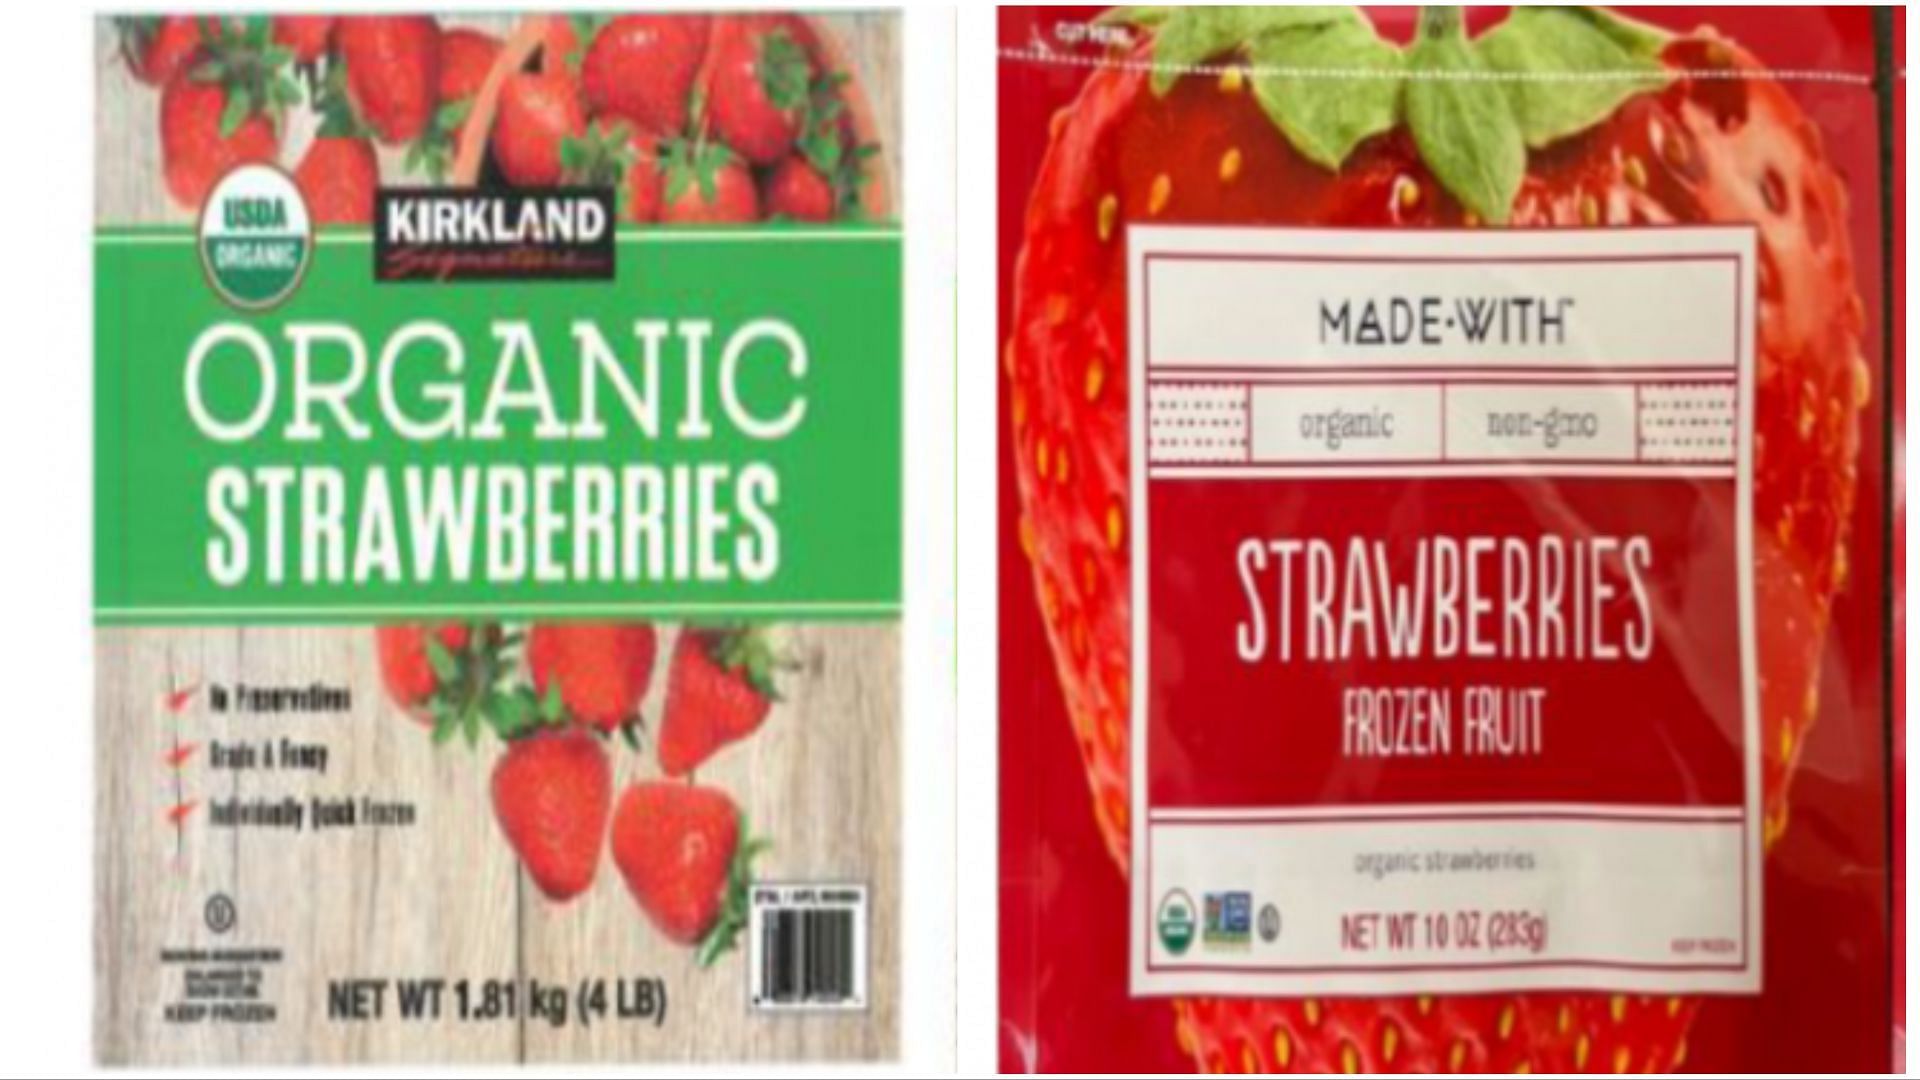 Some of the recalled frozen strawberry products (Image via FDA)